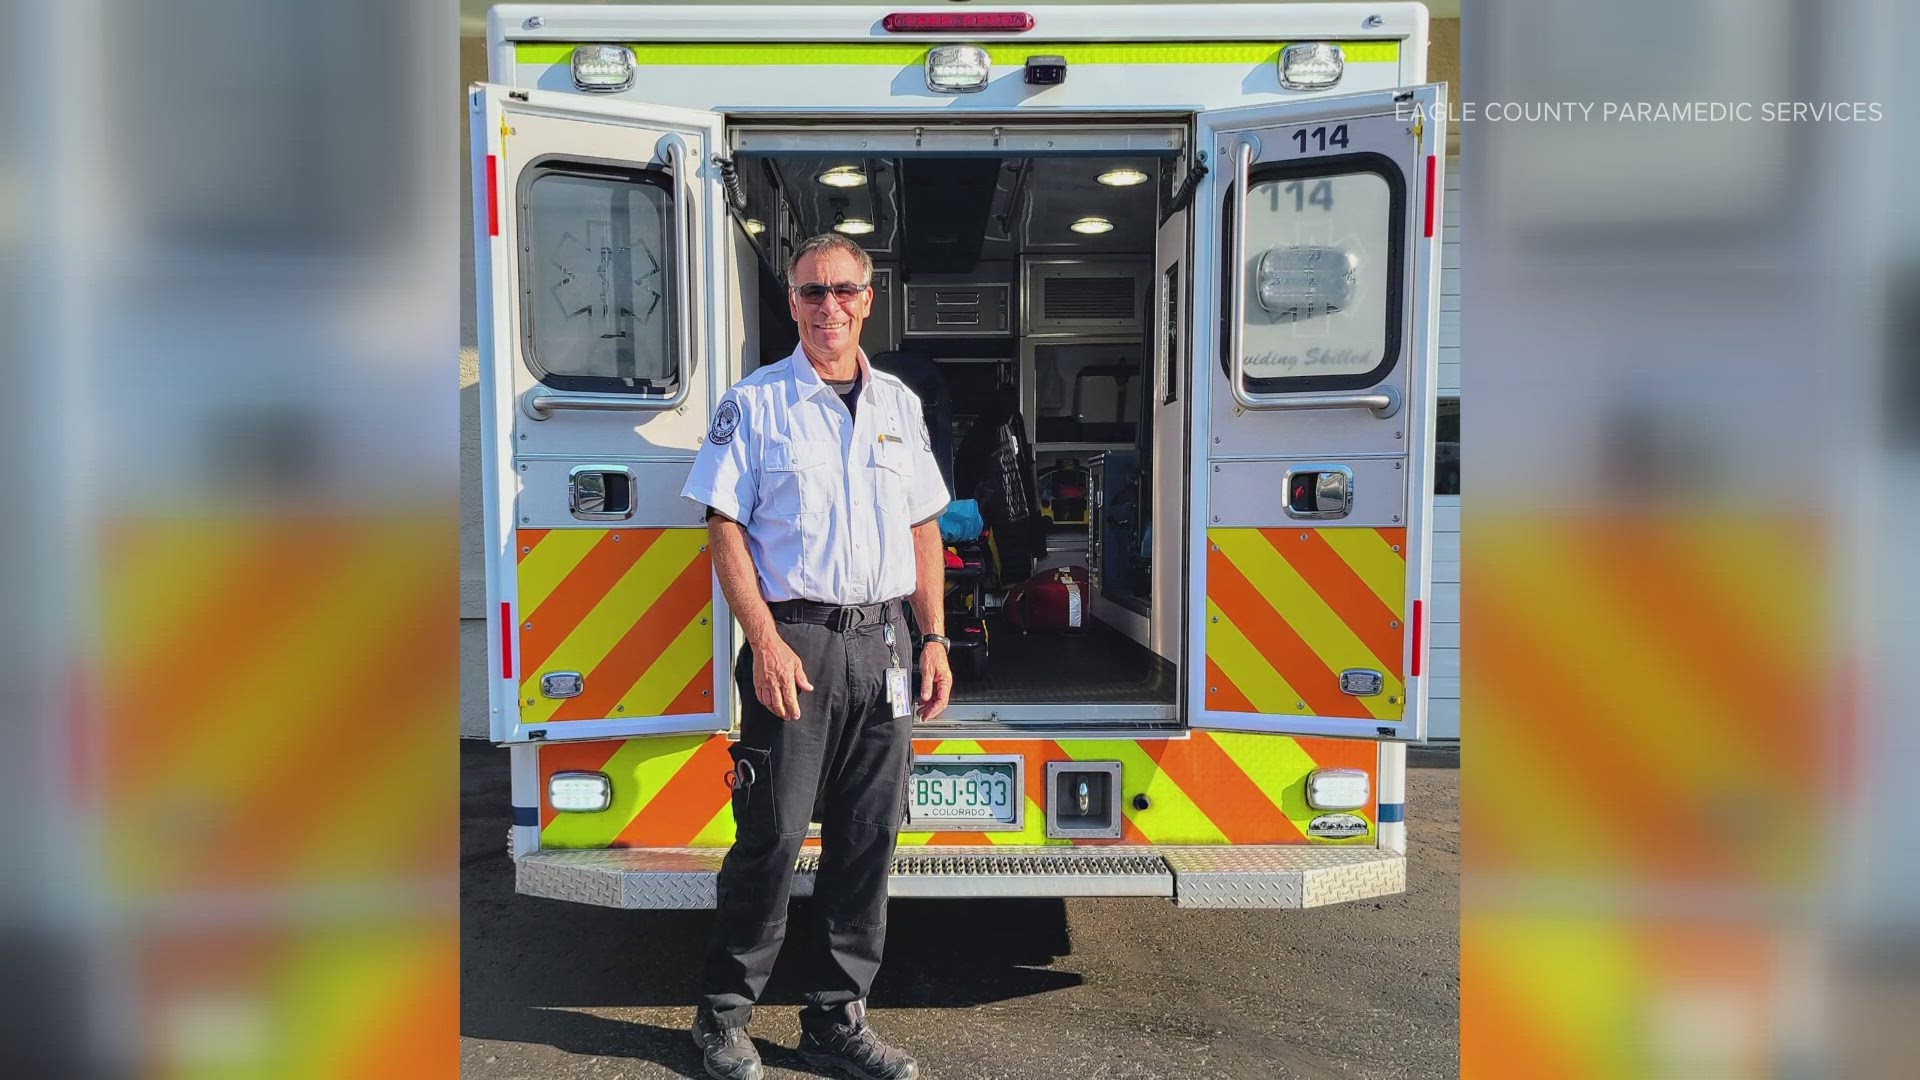 Eagle County Paramedics Services said Steve Zuckerman, 61, had worked with them since 2008.